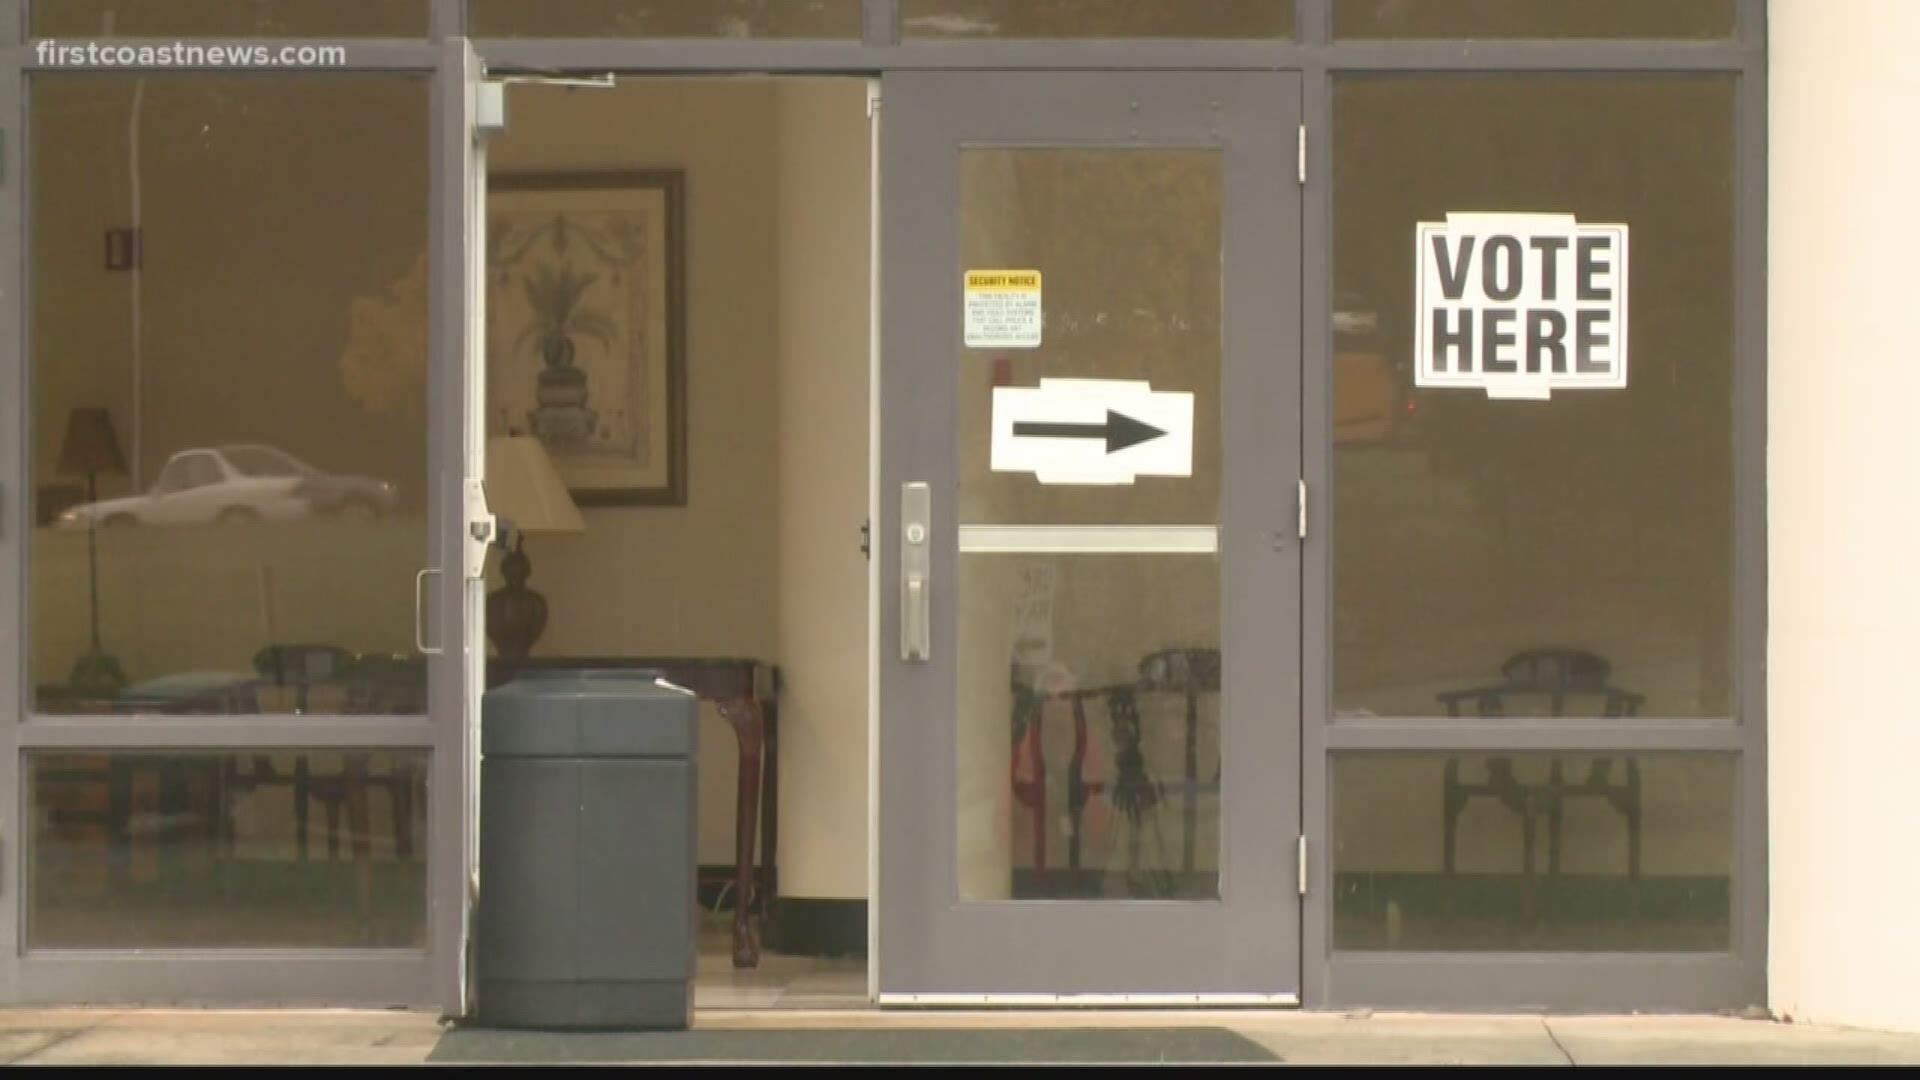 You can head to the polls and cast your vote for the Midterm Elections if you're registered to vote in Duval, Bradford, Flagler and Alachua counties.